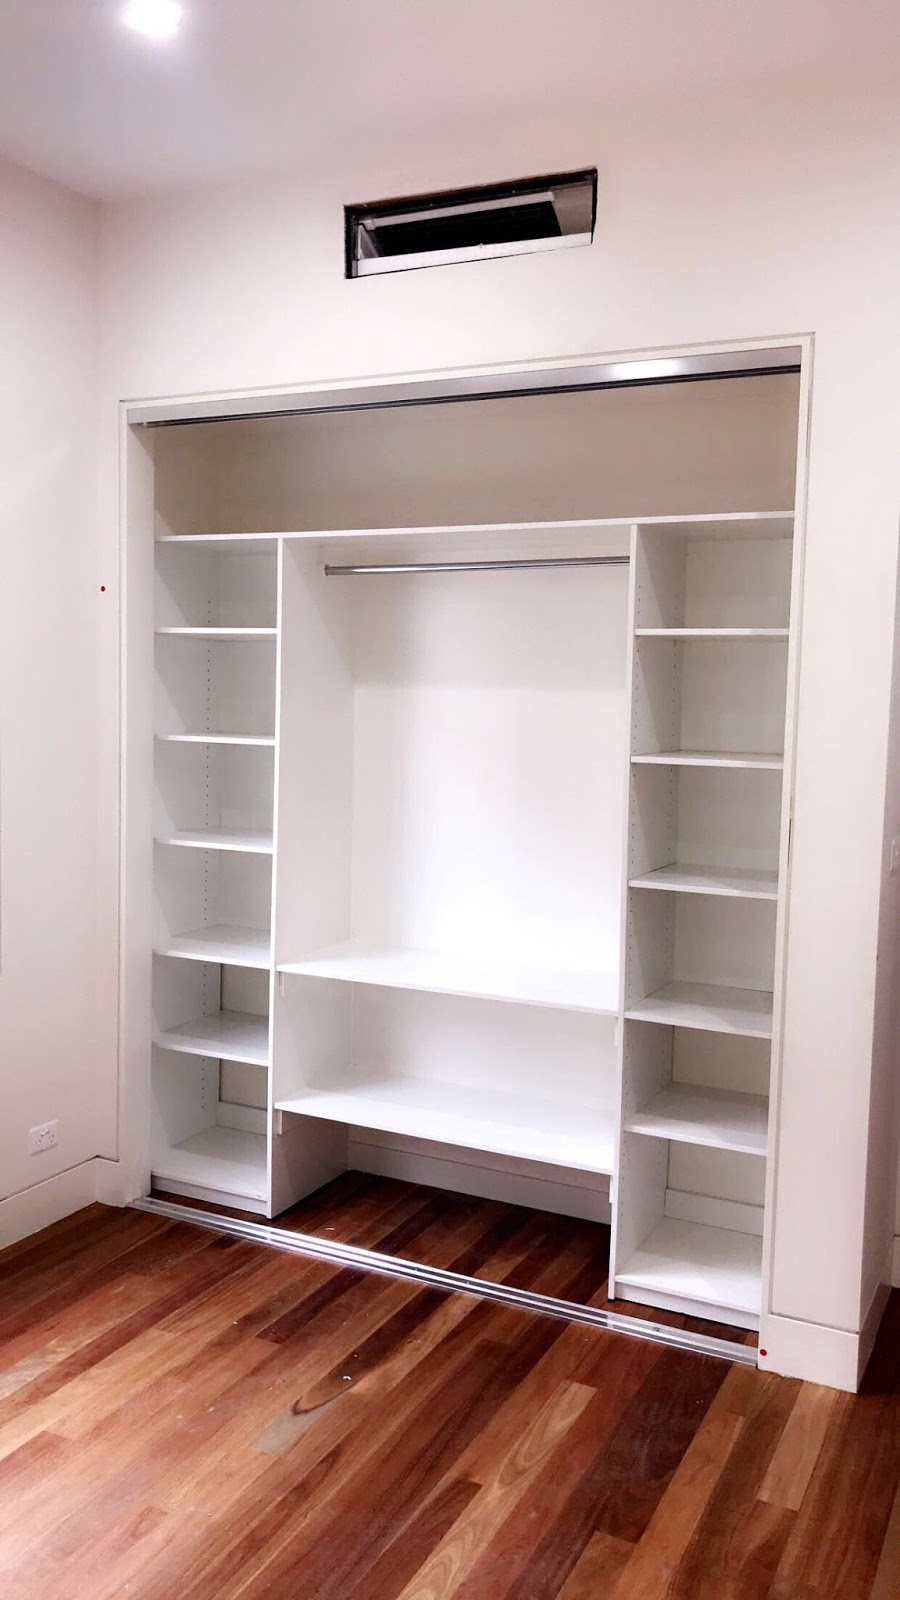 Modern Showers and Wardrobes | store | 35 Horne St, Campbellfield VIC 3061, Australia | 0476767476 OR +61 476 767 476